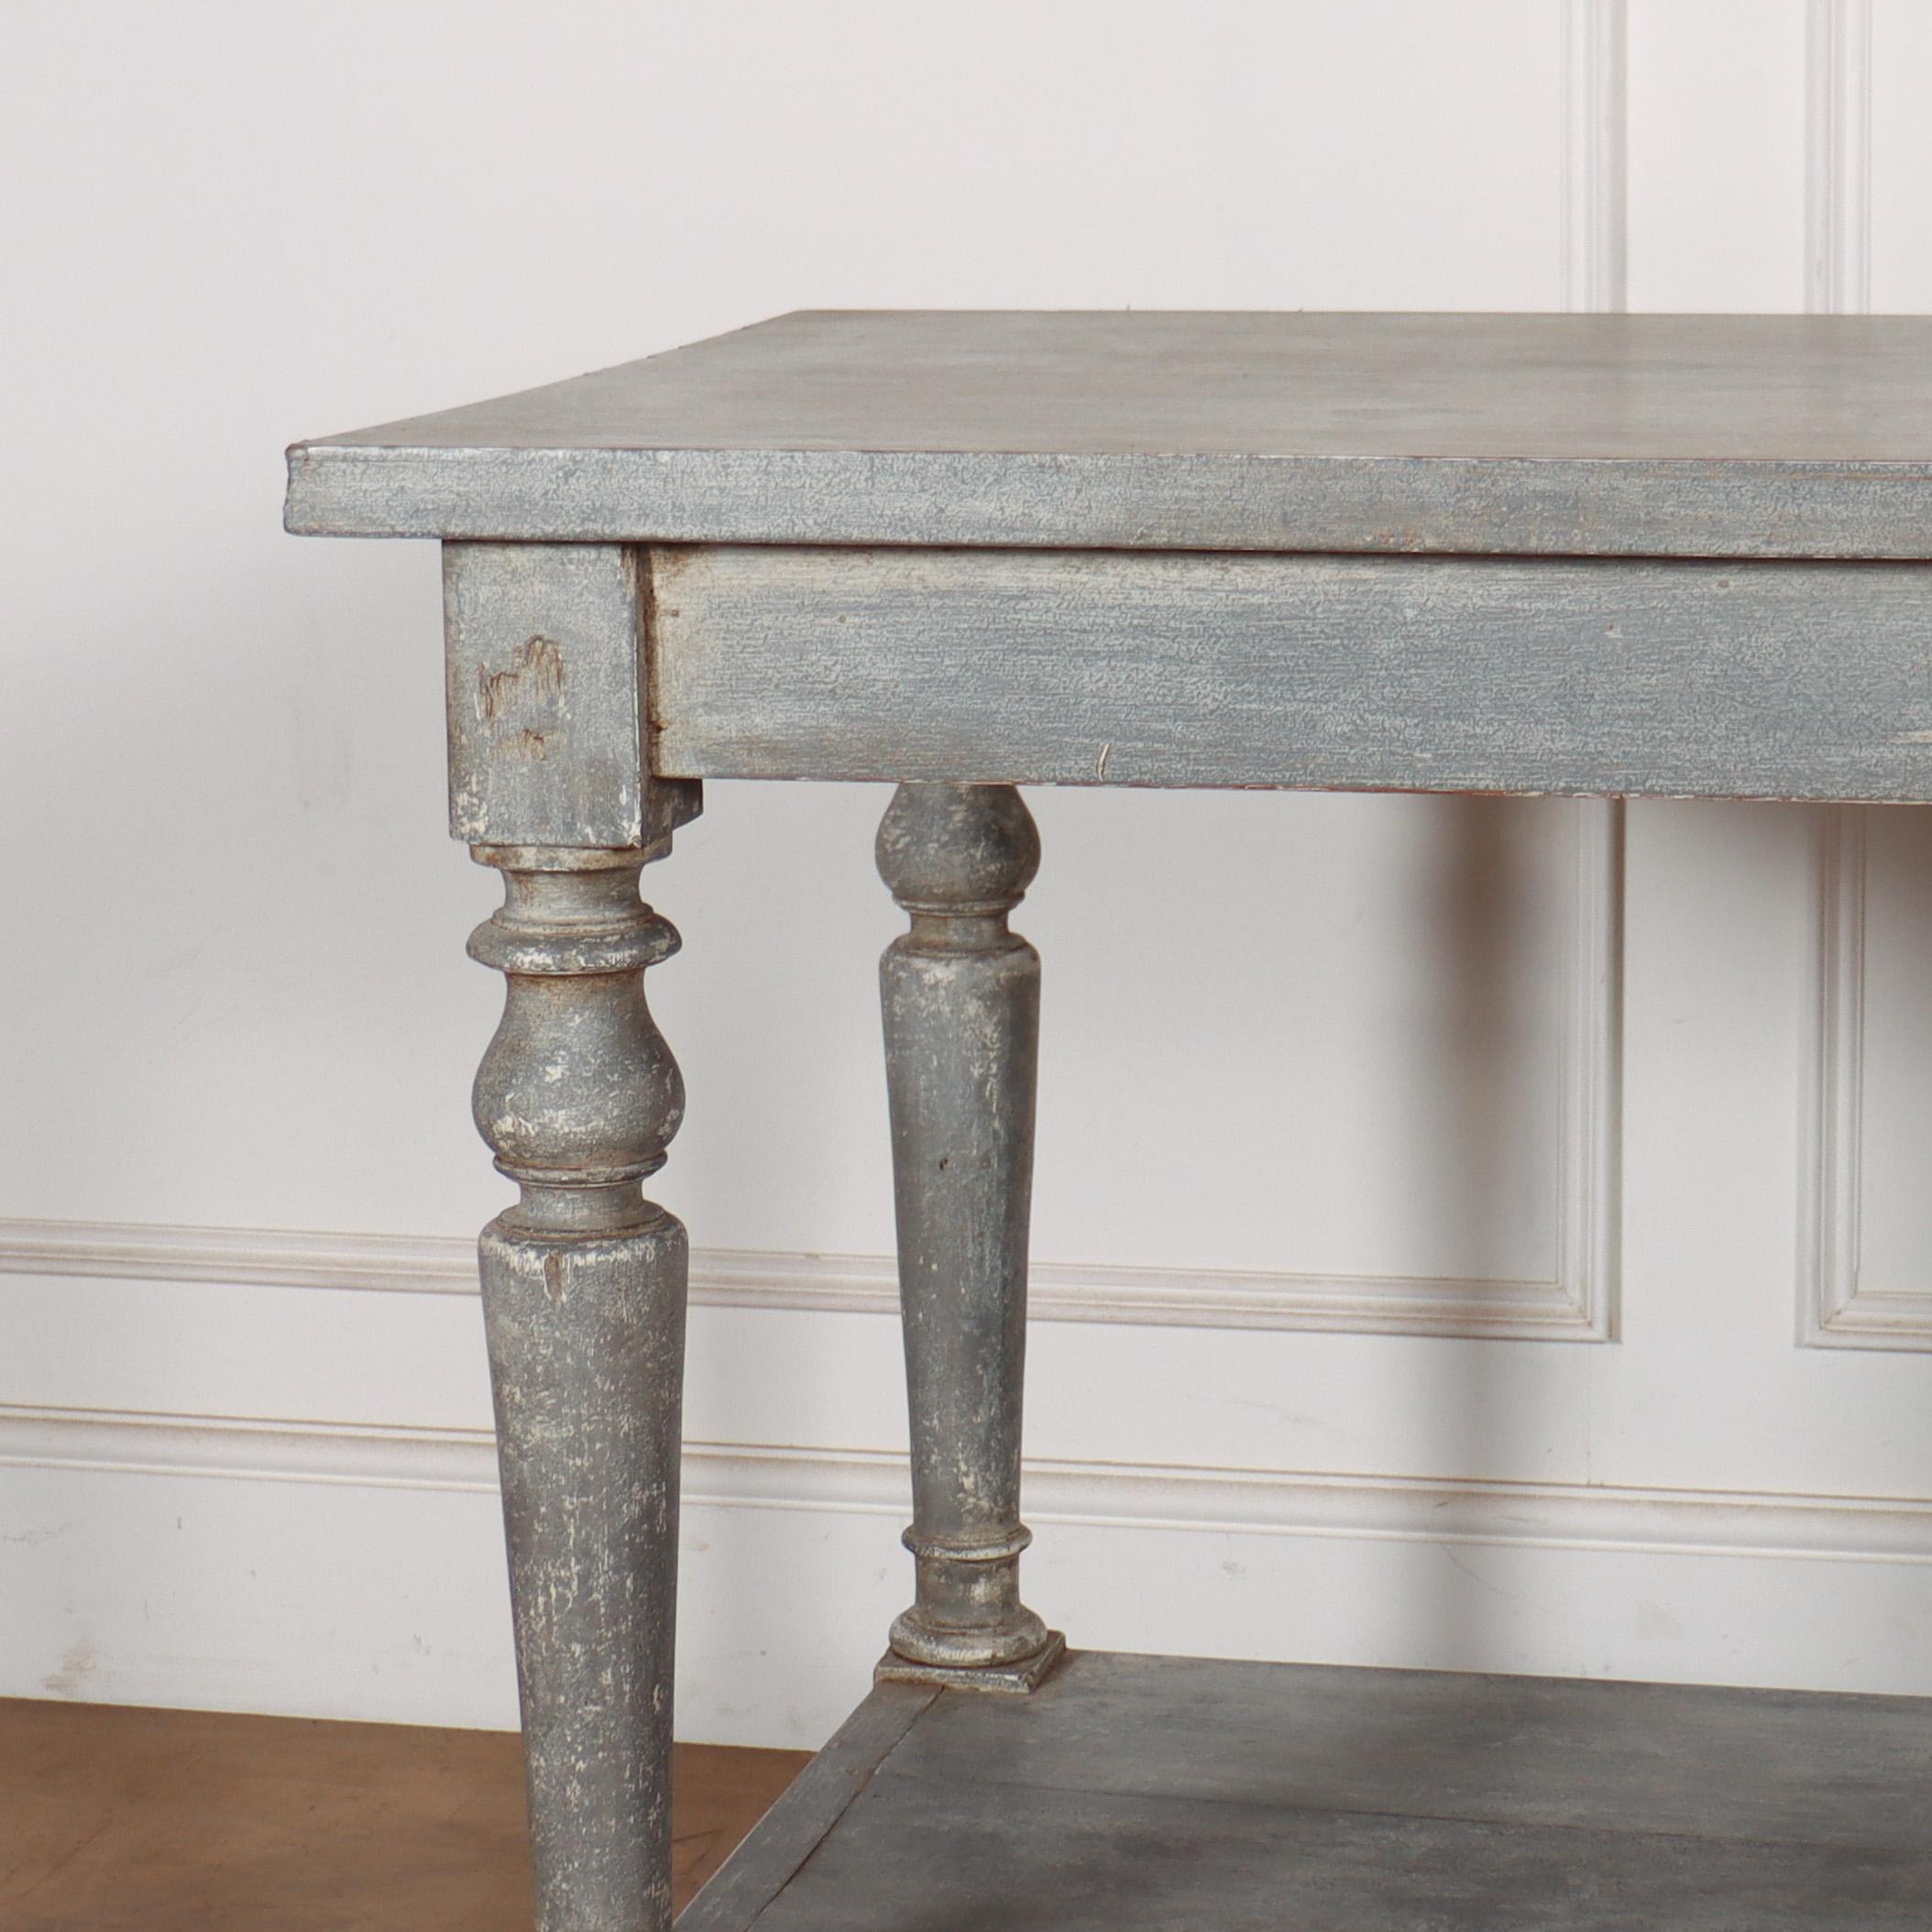 19th C French drapers table with old distressed grey paint. 1860

Reference: 8089

Dimensions
60.5 inches (154 cms) Wide
27 inches (69 cms) Deep
32.5 inches (83 cms) High